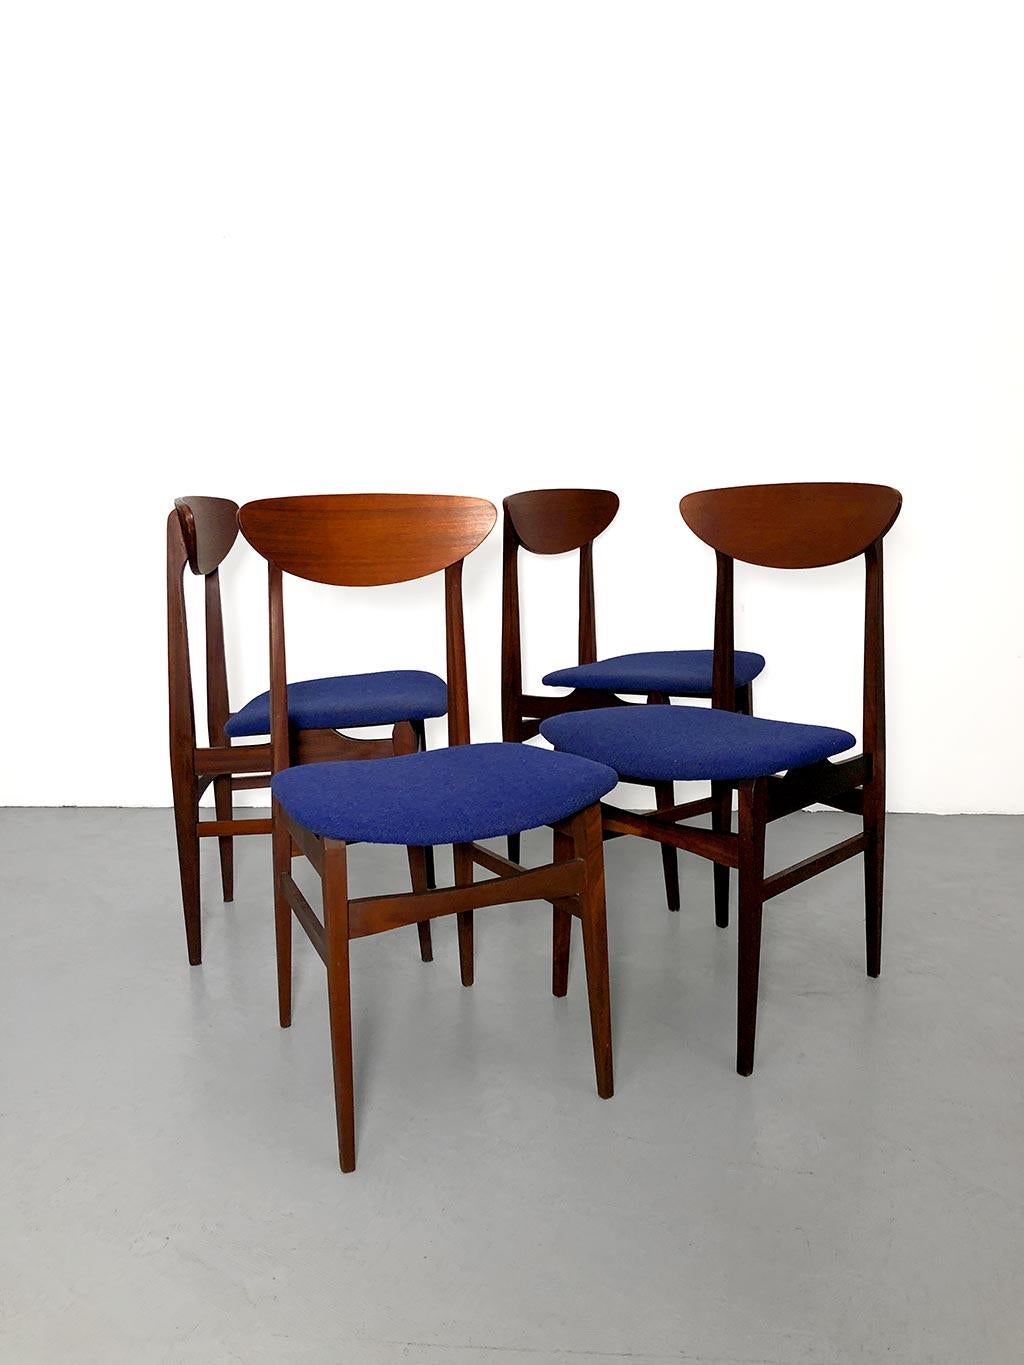 Mid-Century Modern Set of 4 dining chairs manufactured by Farstrup, Denmark, 1960s.  For Sale